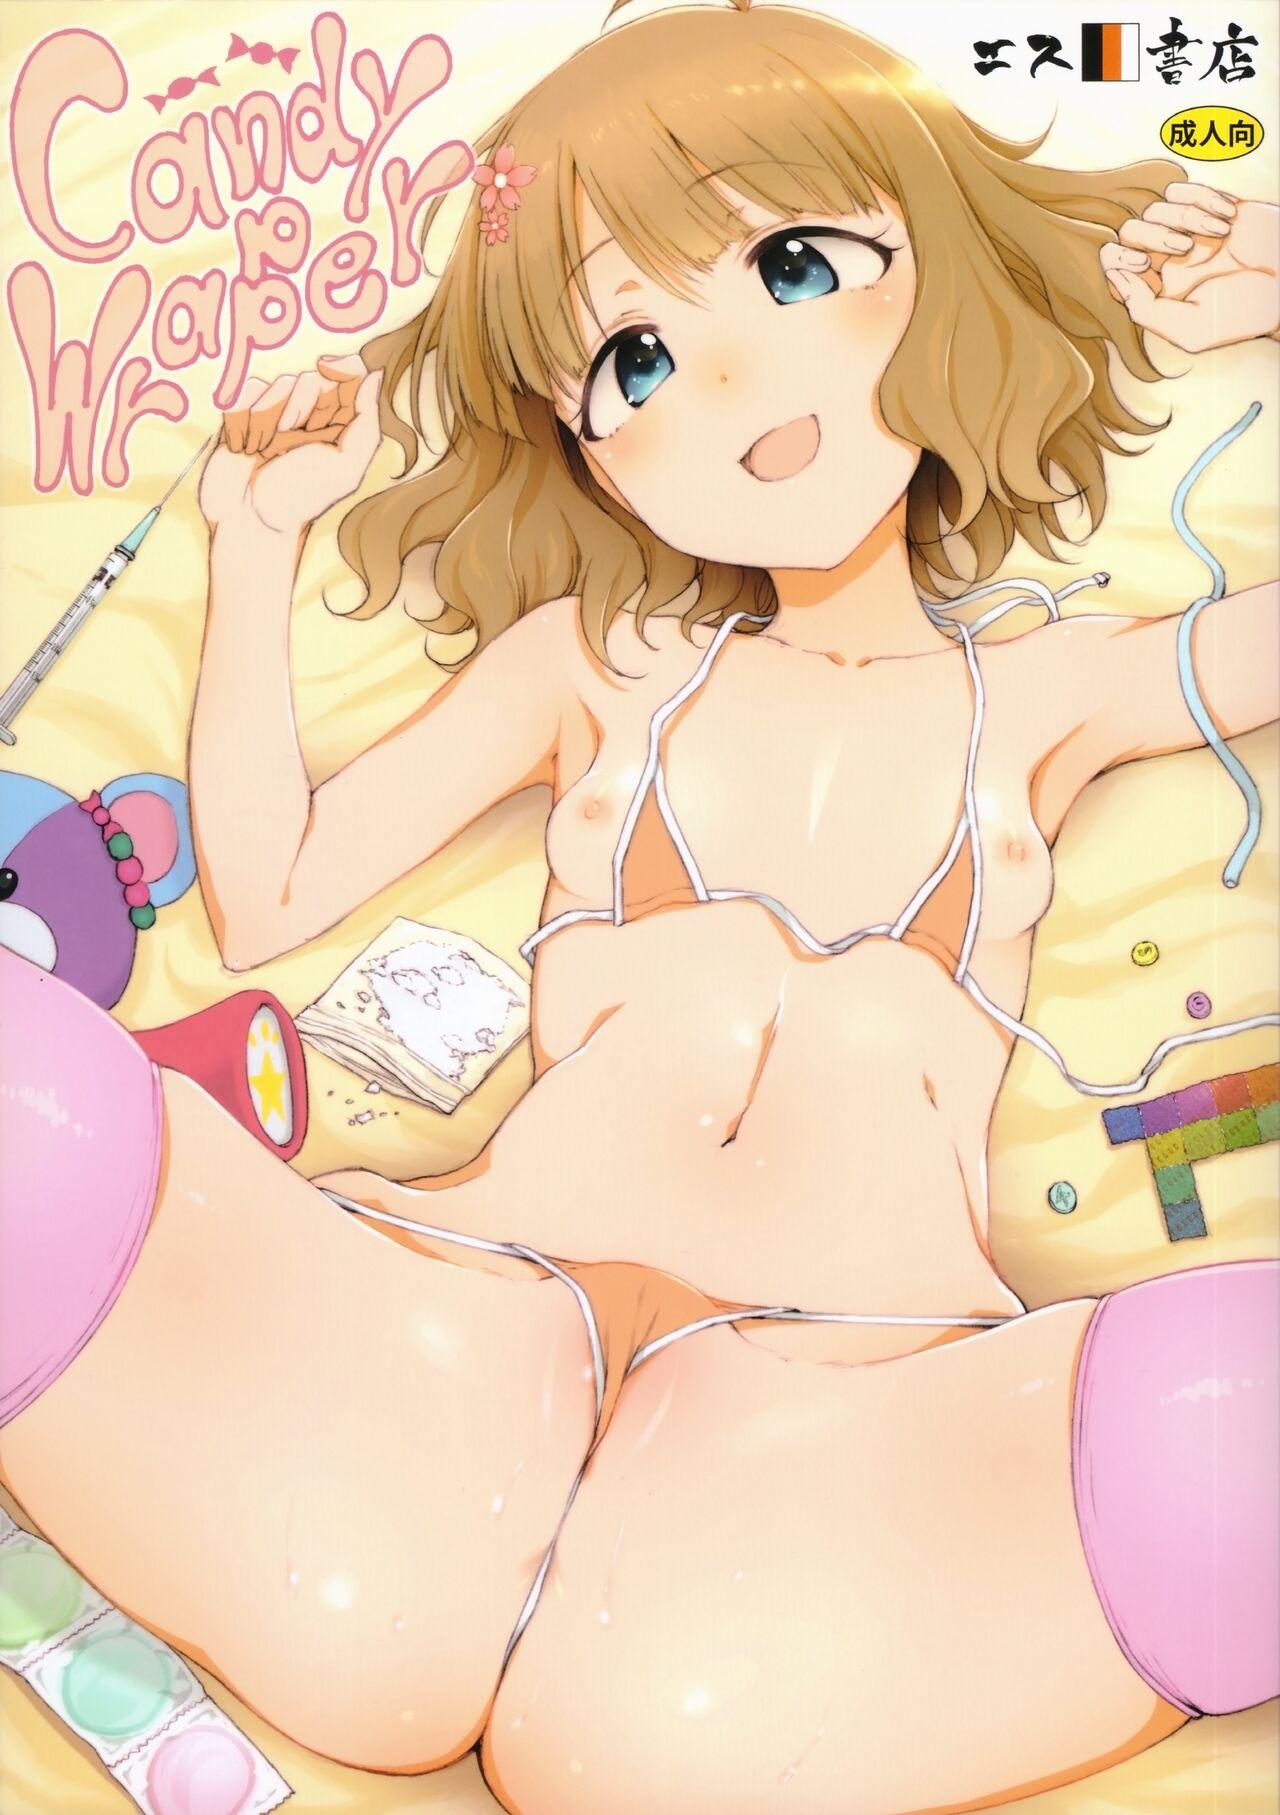 Delicia Candy Wrapper - The idolmaster Old Man - Page 2